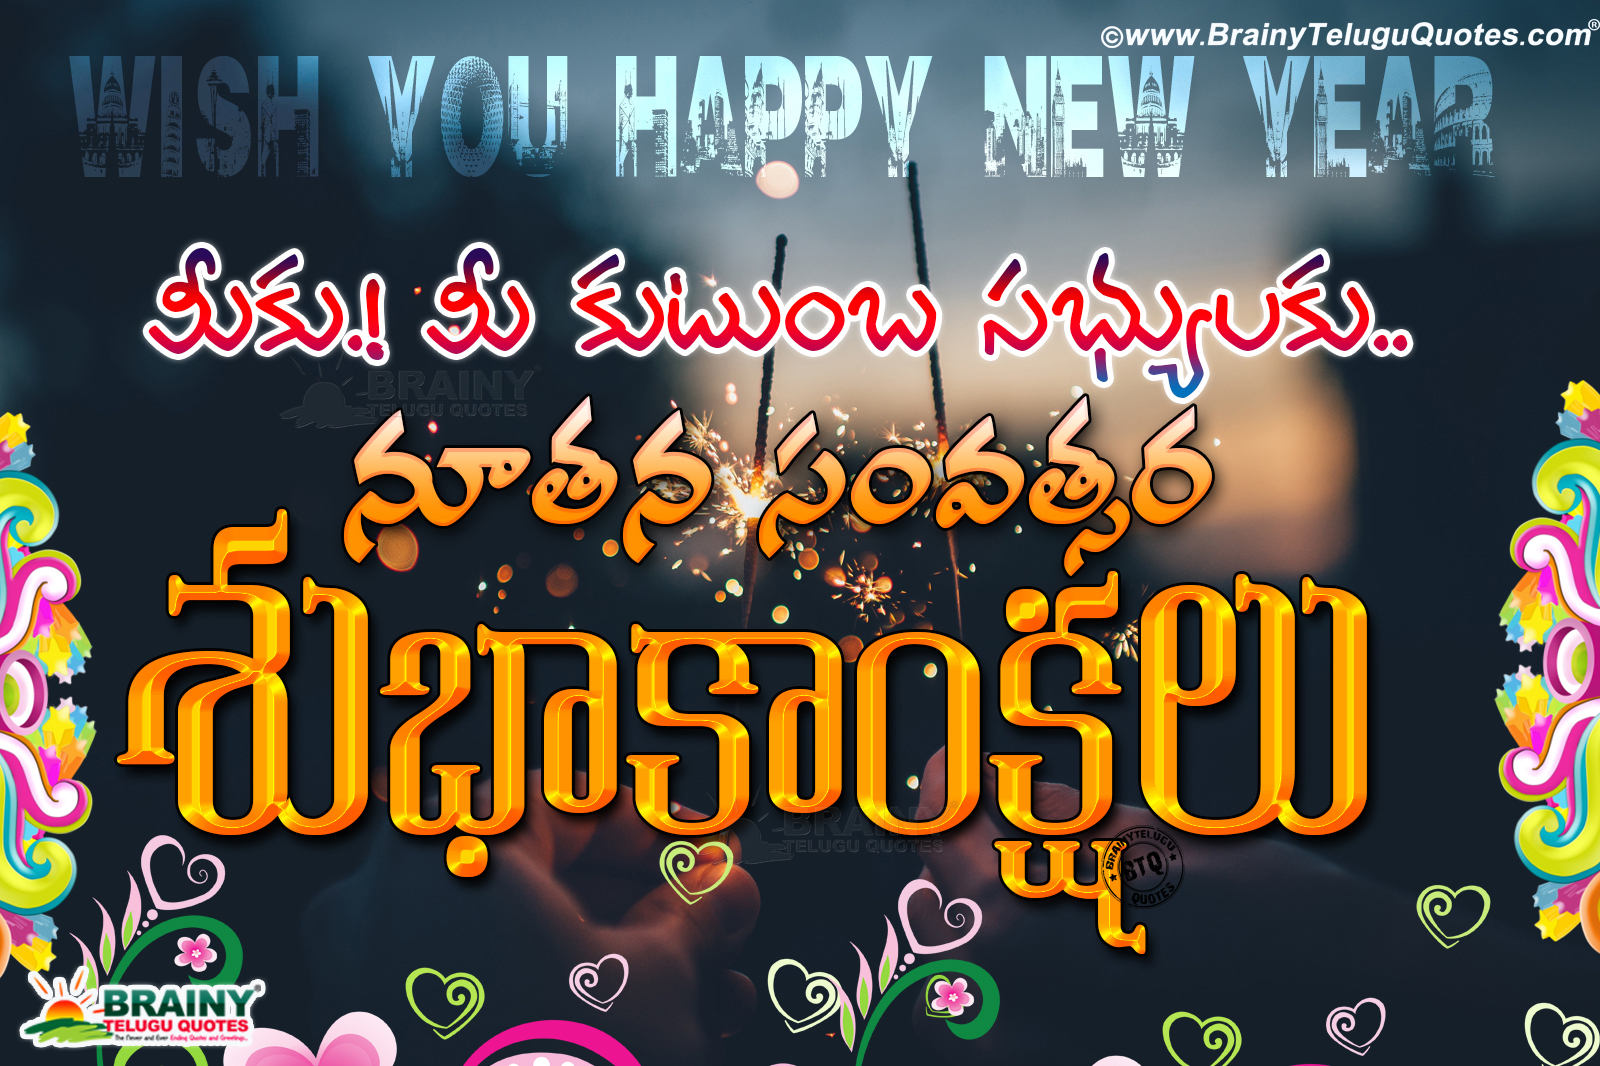 2018 Advanced New Year Greetings with hd wallpapers in Telugu Happy